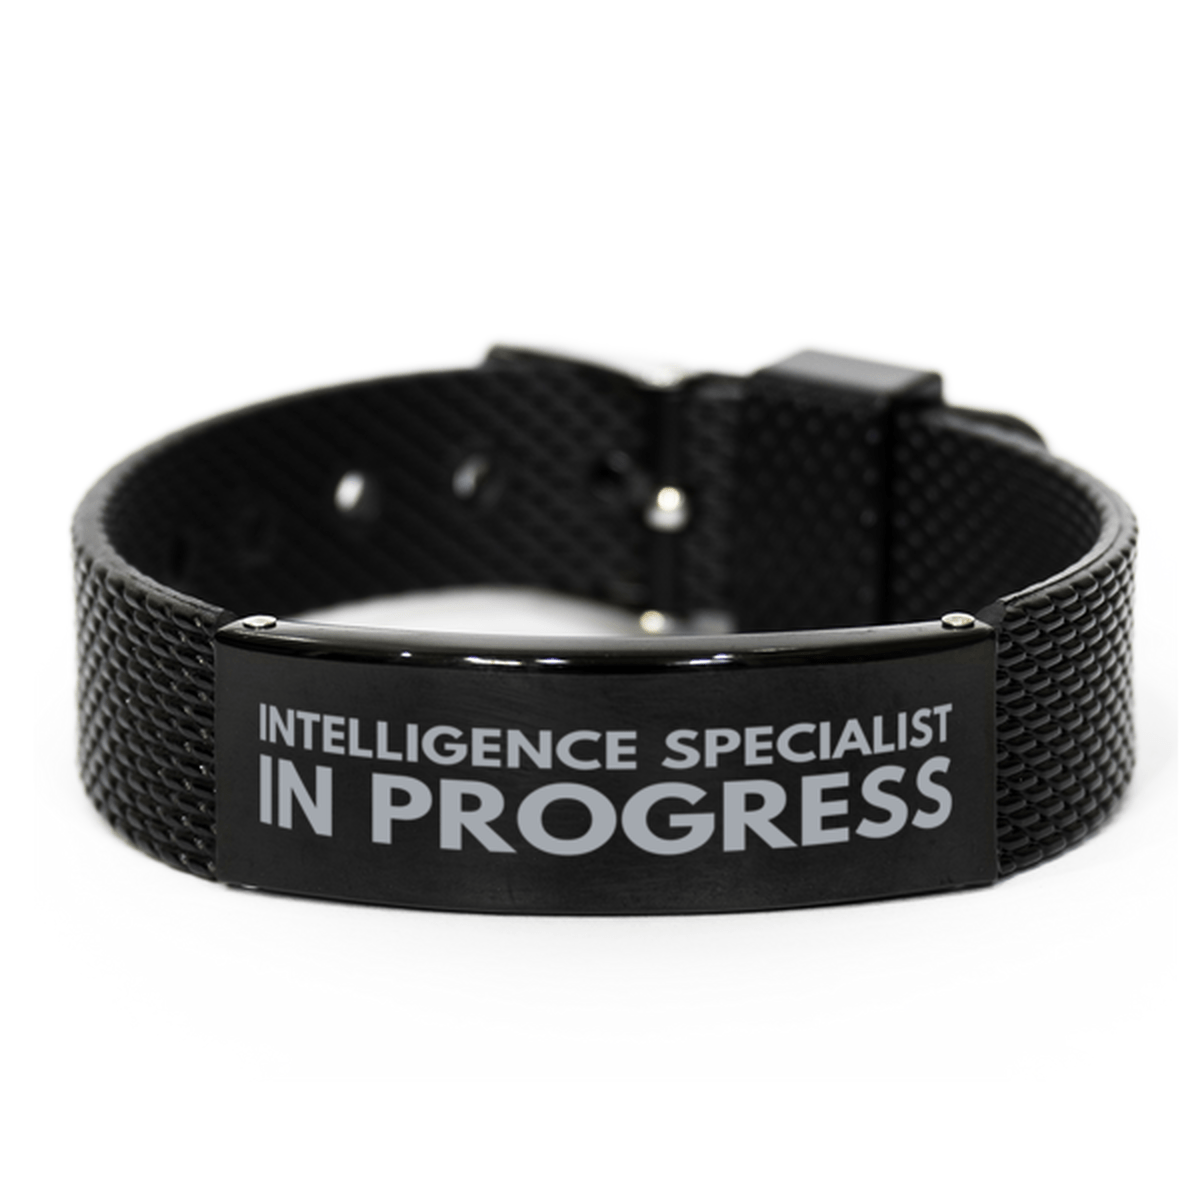 Inspirational Intelligence Specialist Black Shark Mesh Bracelet, Intelligence Specialist In Progress, Best Graduation Gifts for Students